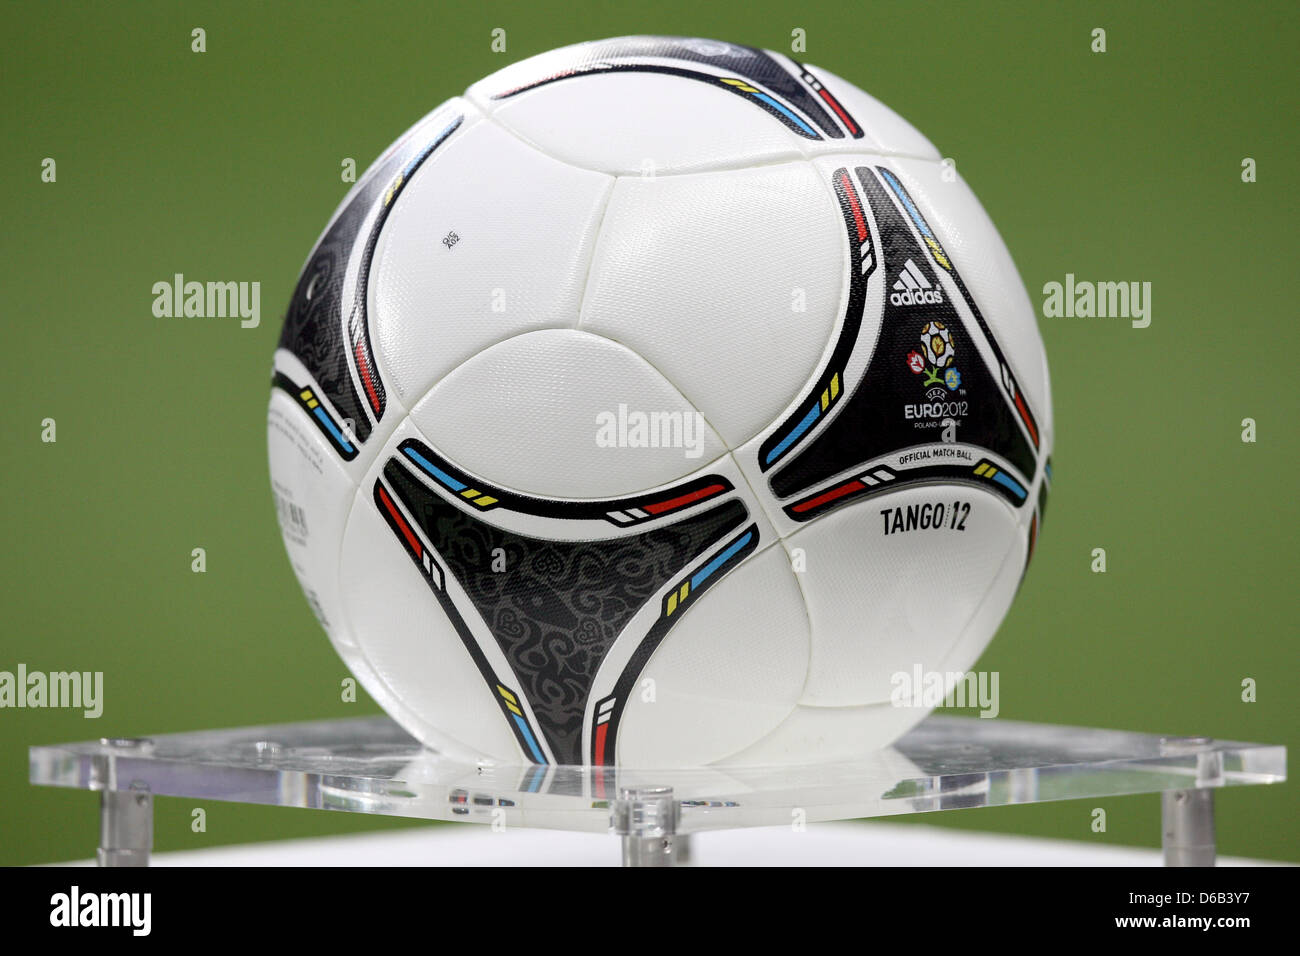 The soccer ball 'Tango 12' by adidas lies on a pedestal before the international soccer match between and Argentina at the Commerzbank-Arena in Frankfurt Main, Germany, 15 August 2012. Photo: Fredrik